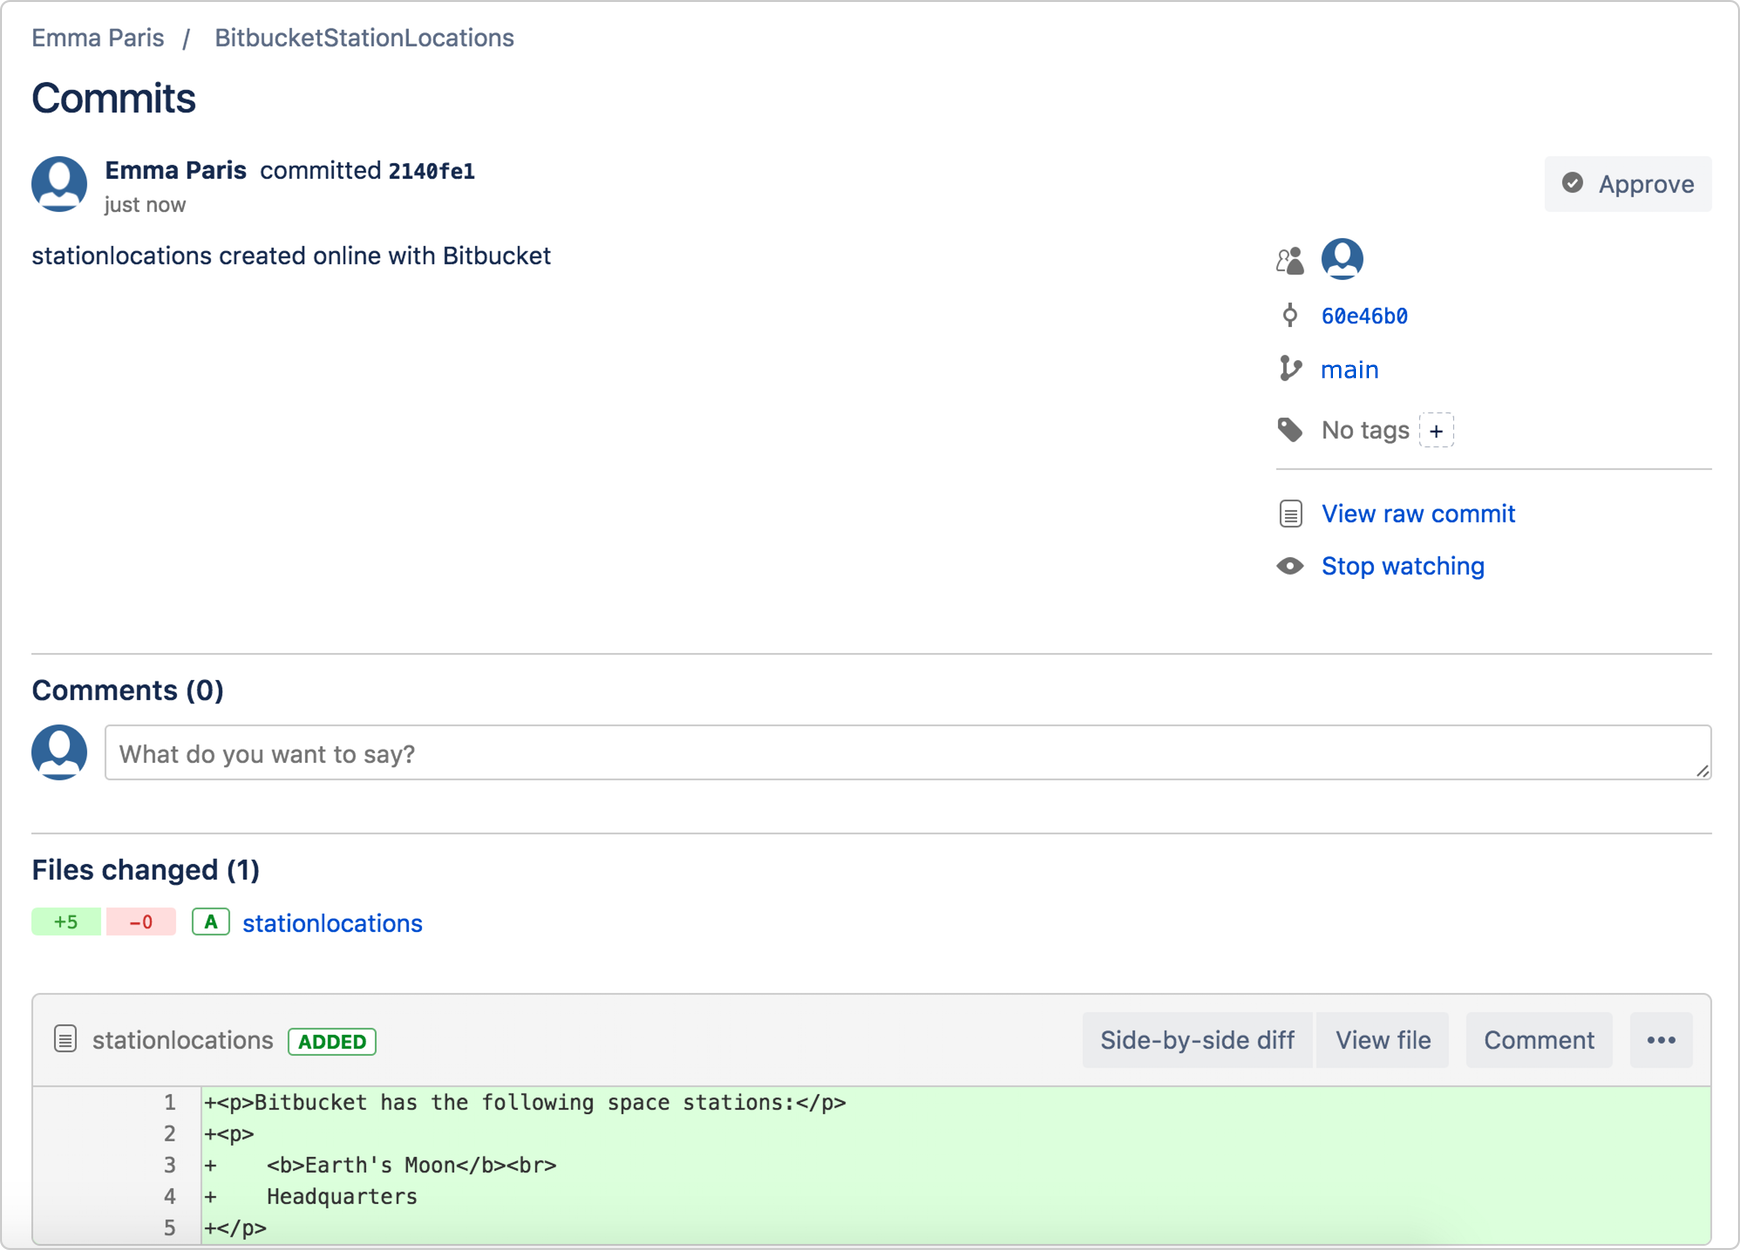 Page with details of commit in Bitbucket